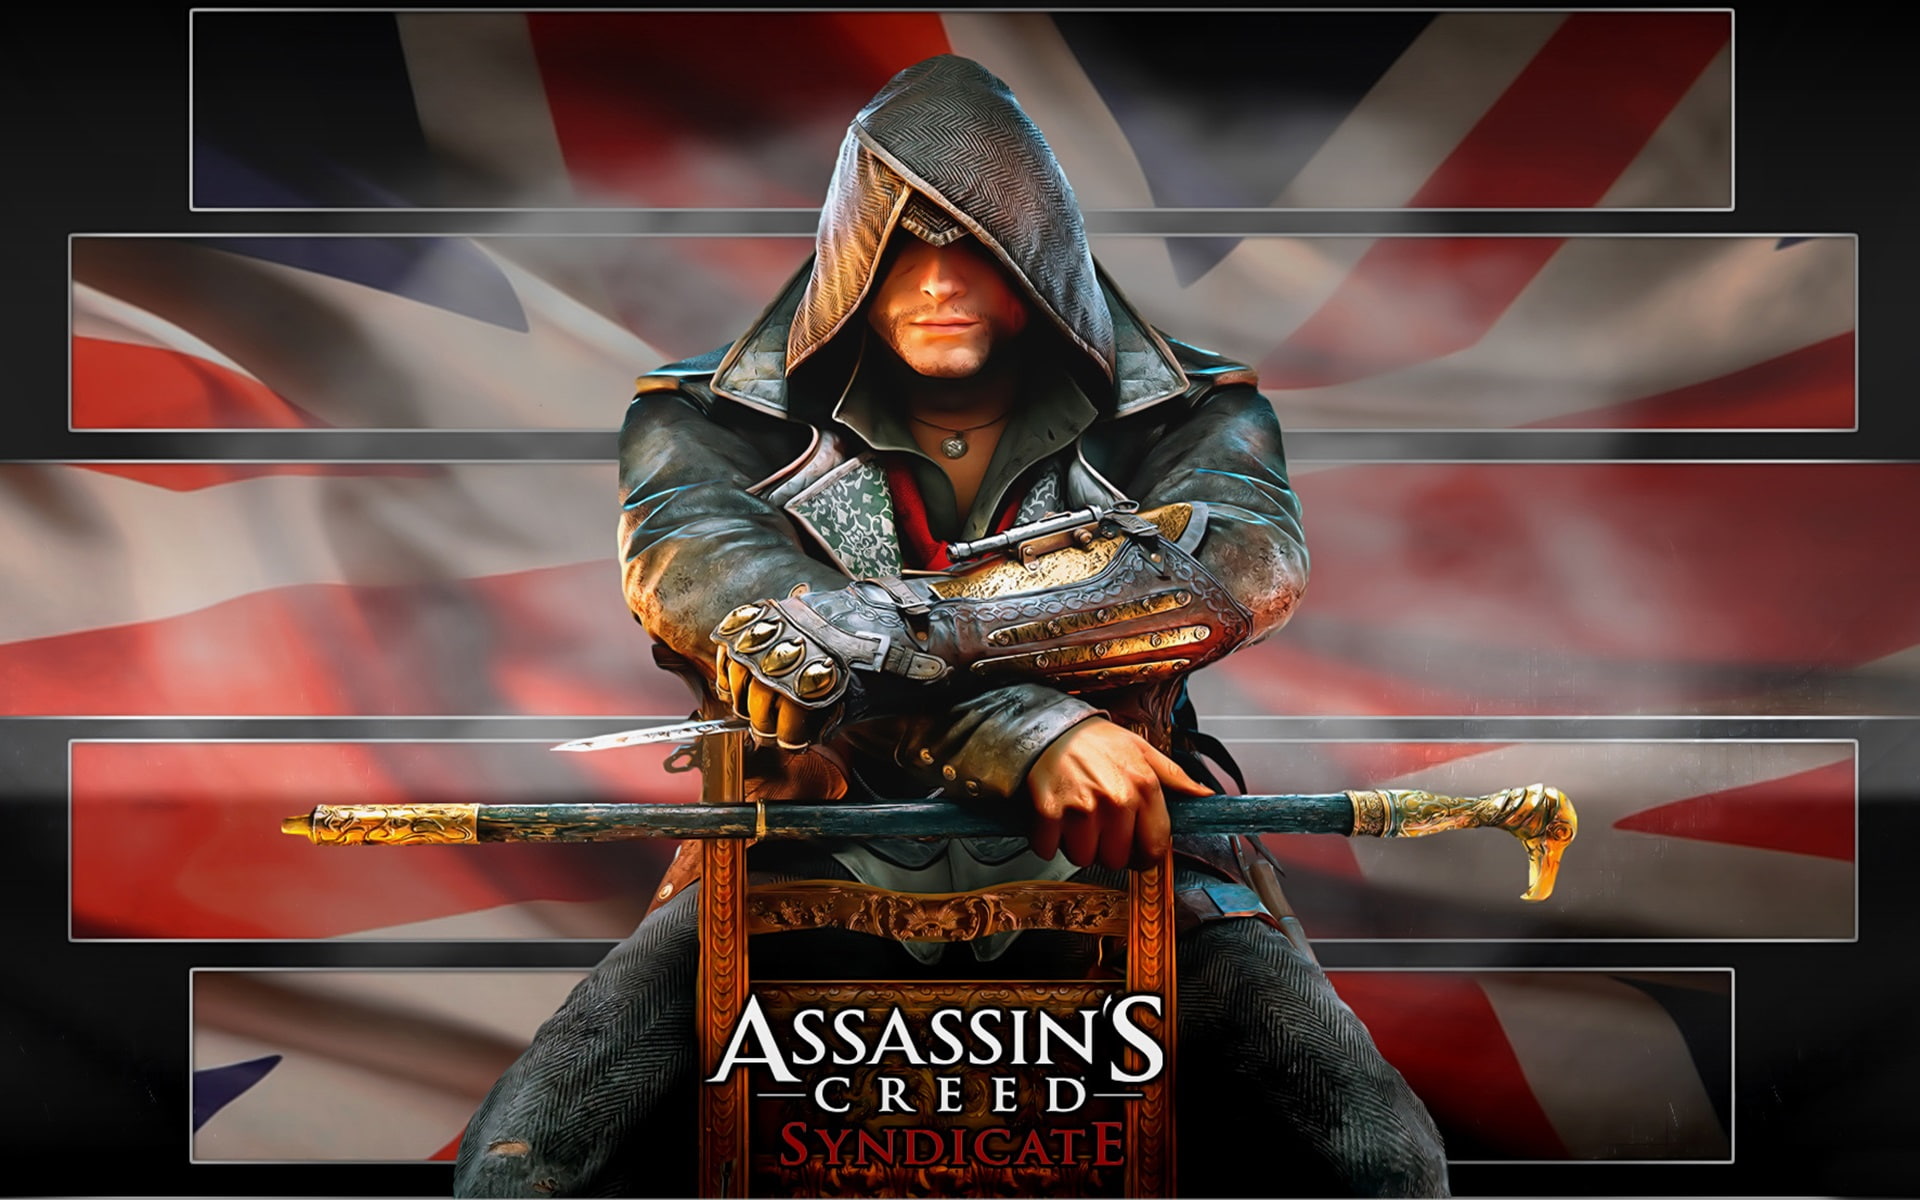 Assassin's Creed: Syndicate, killer sit on chair, assassin's creed syndicate poster